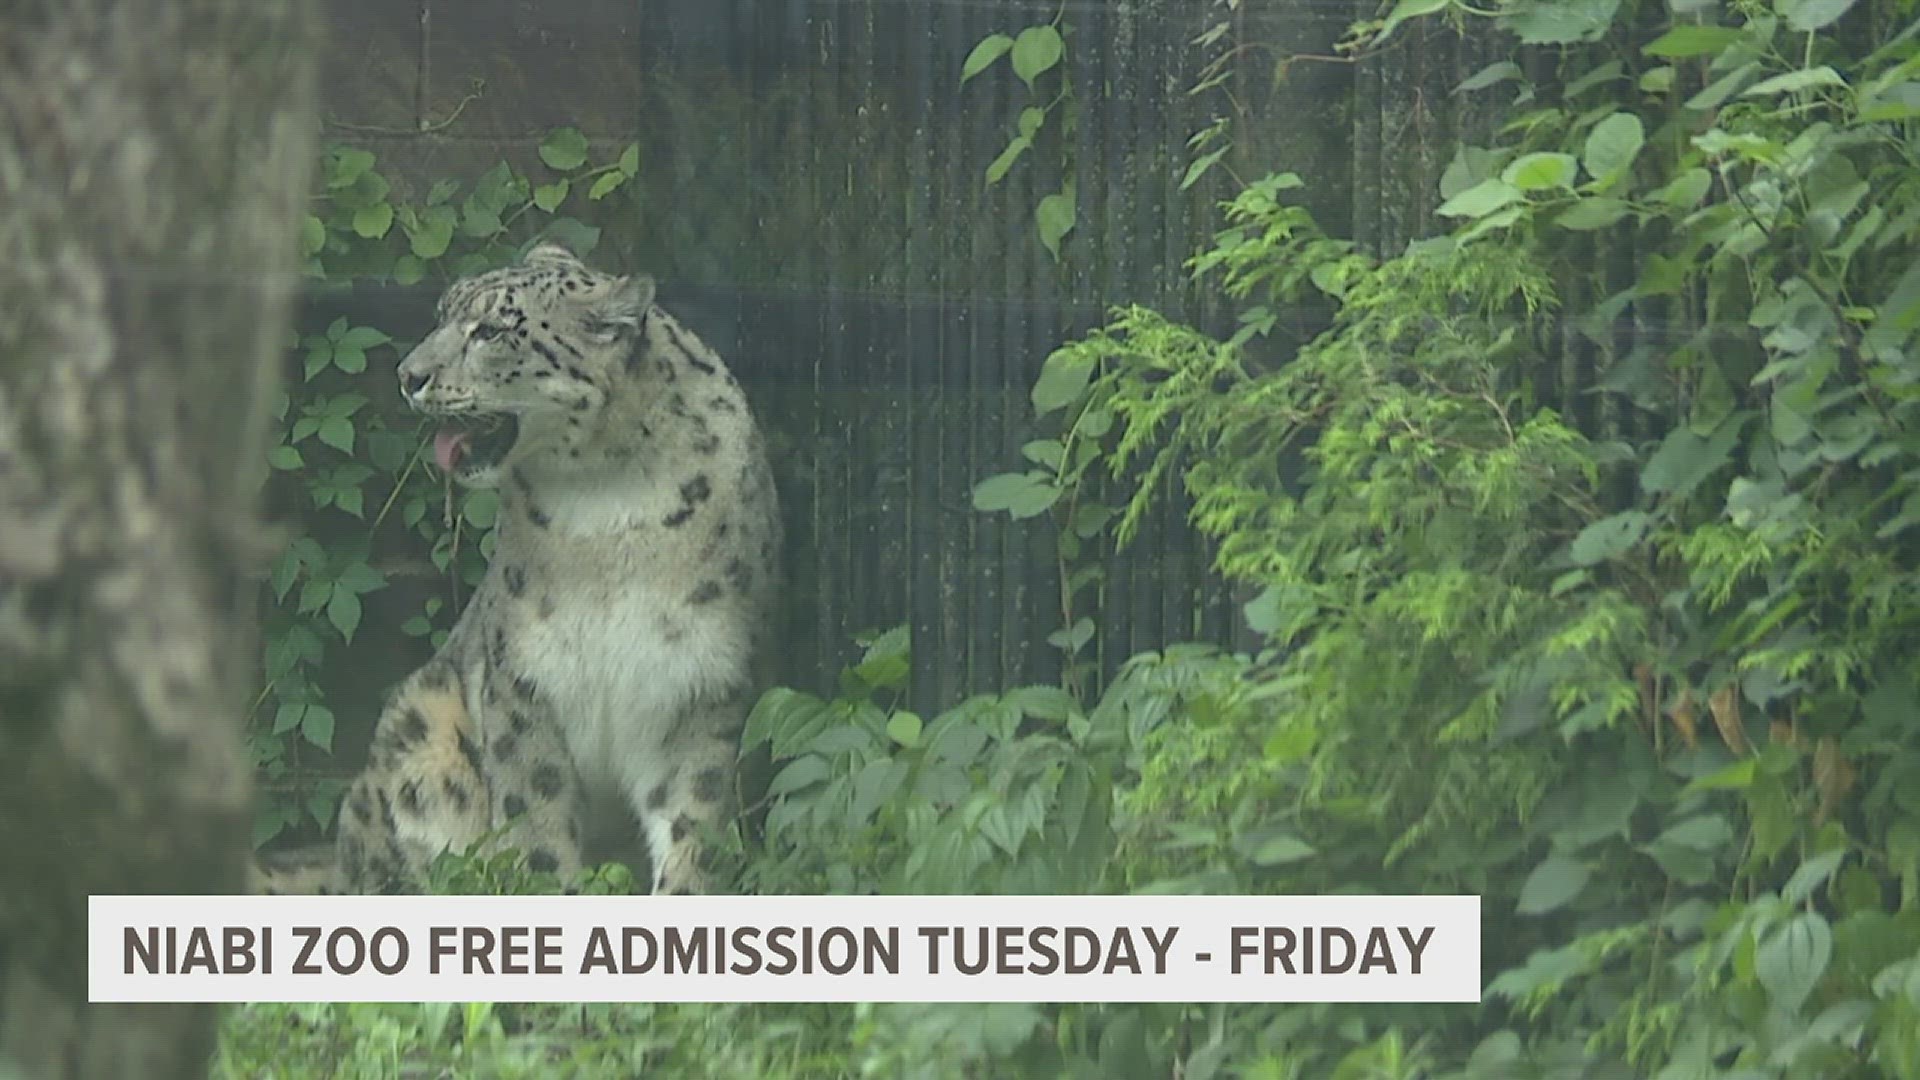 The zoo will be closed on Mondays for the fall and winter seasons.